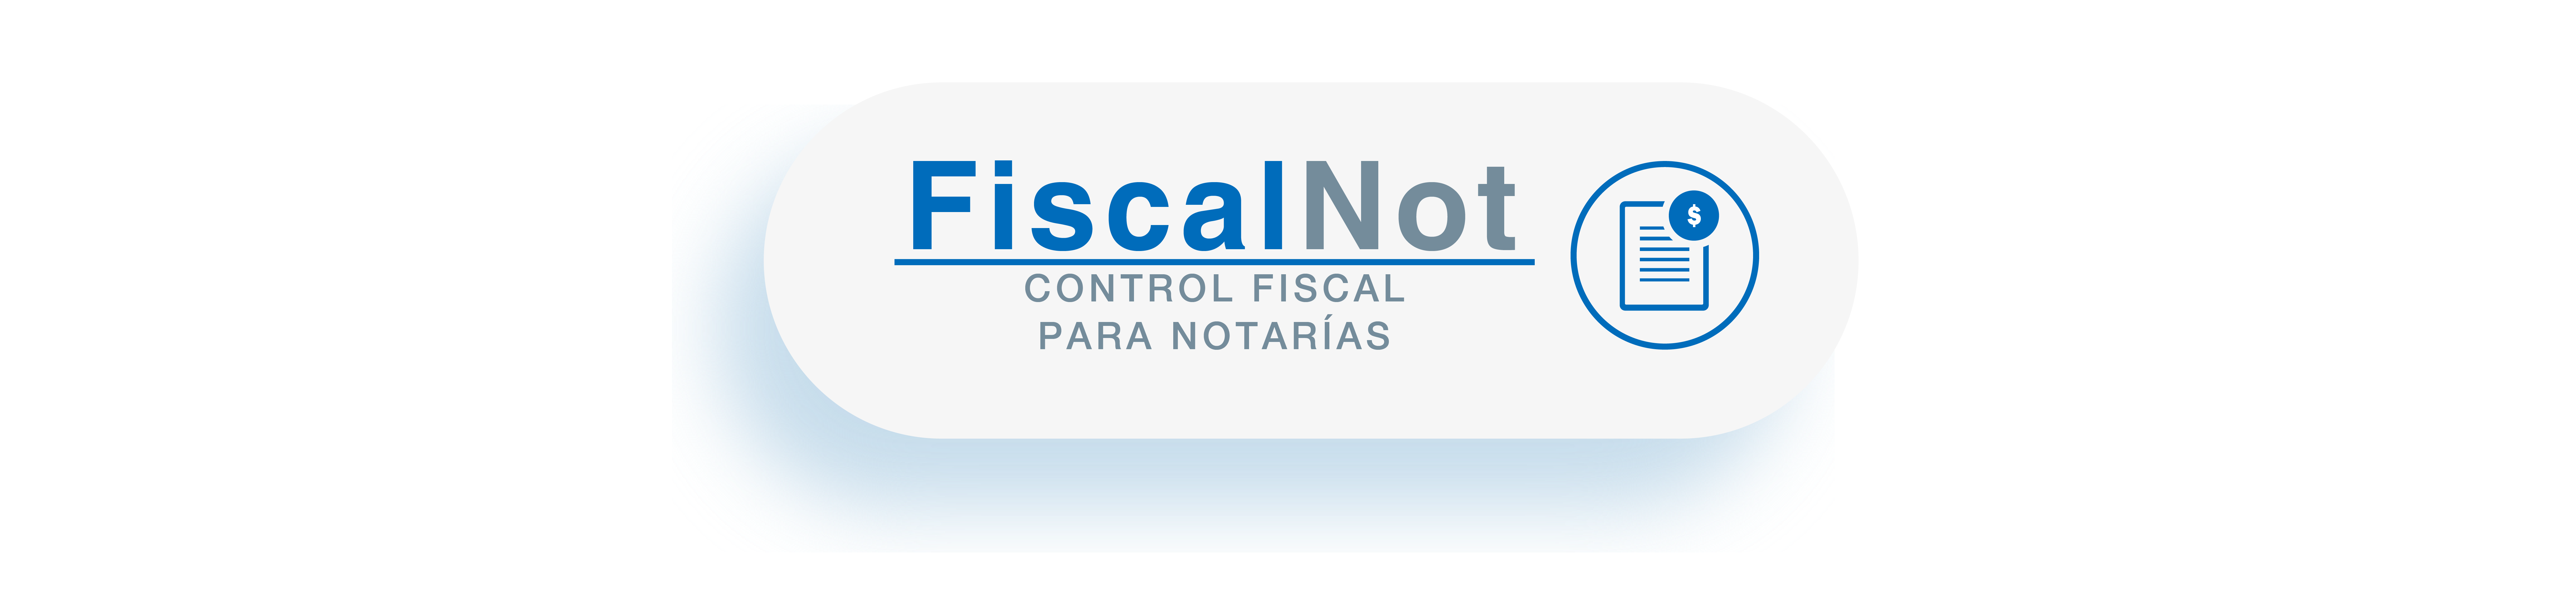 Fiscalnot